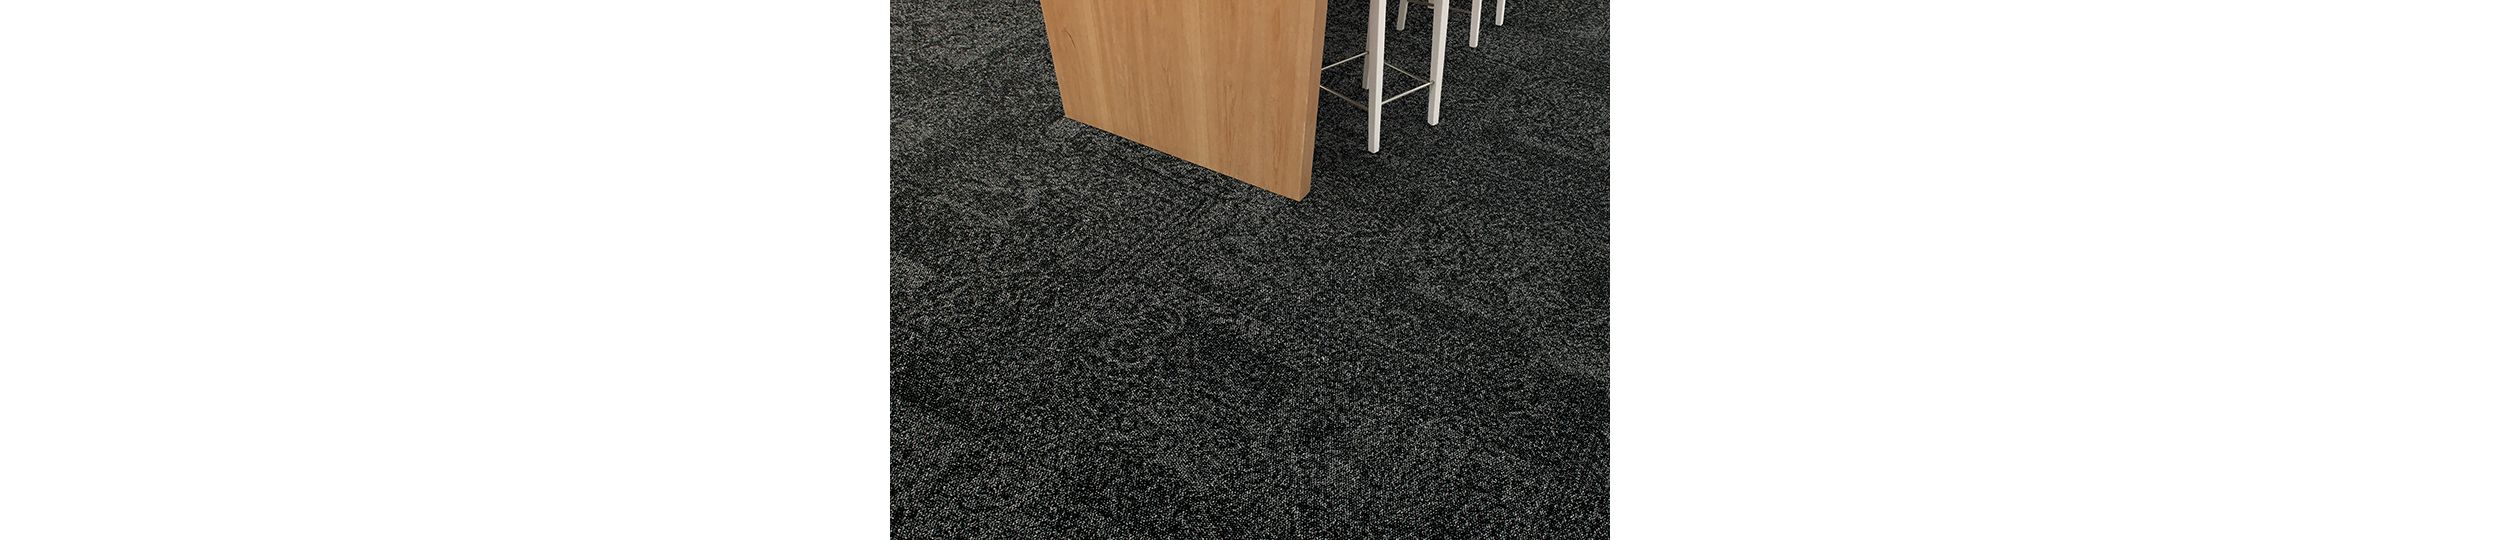 Interface Open Air 405 carpet tile in floor view with corner of wood table afbeeldingnummer 4